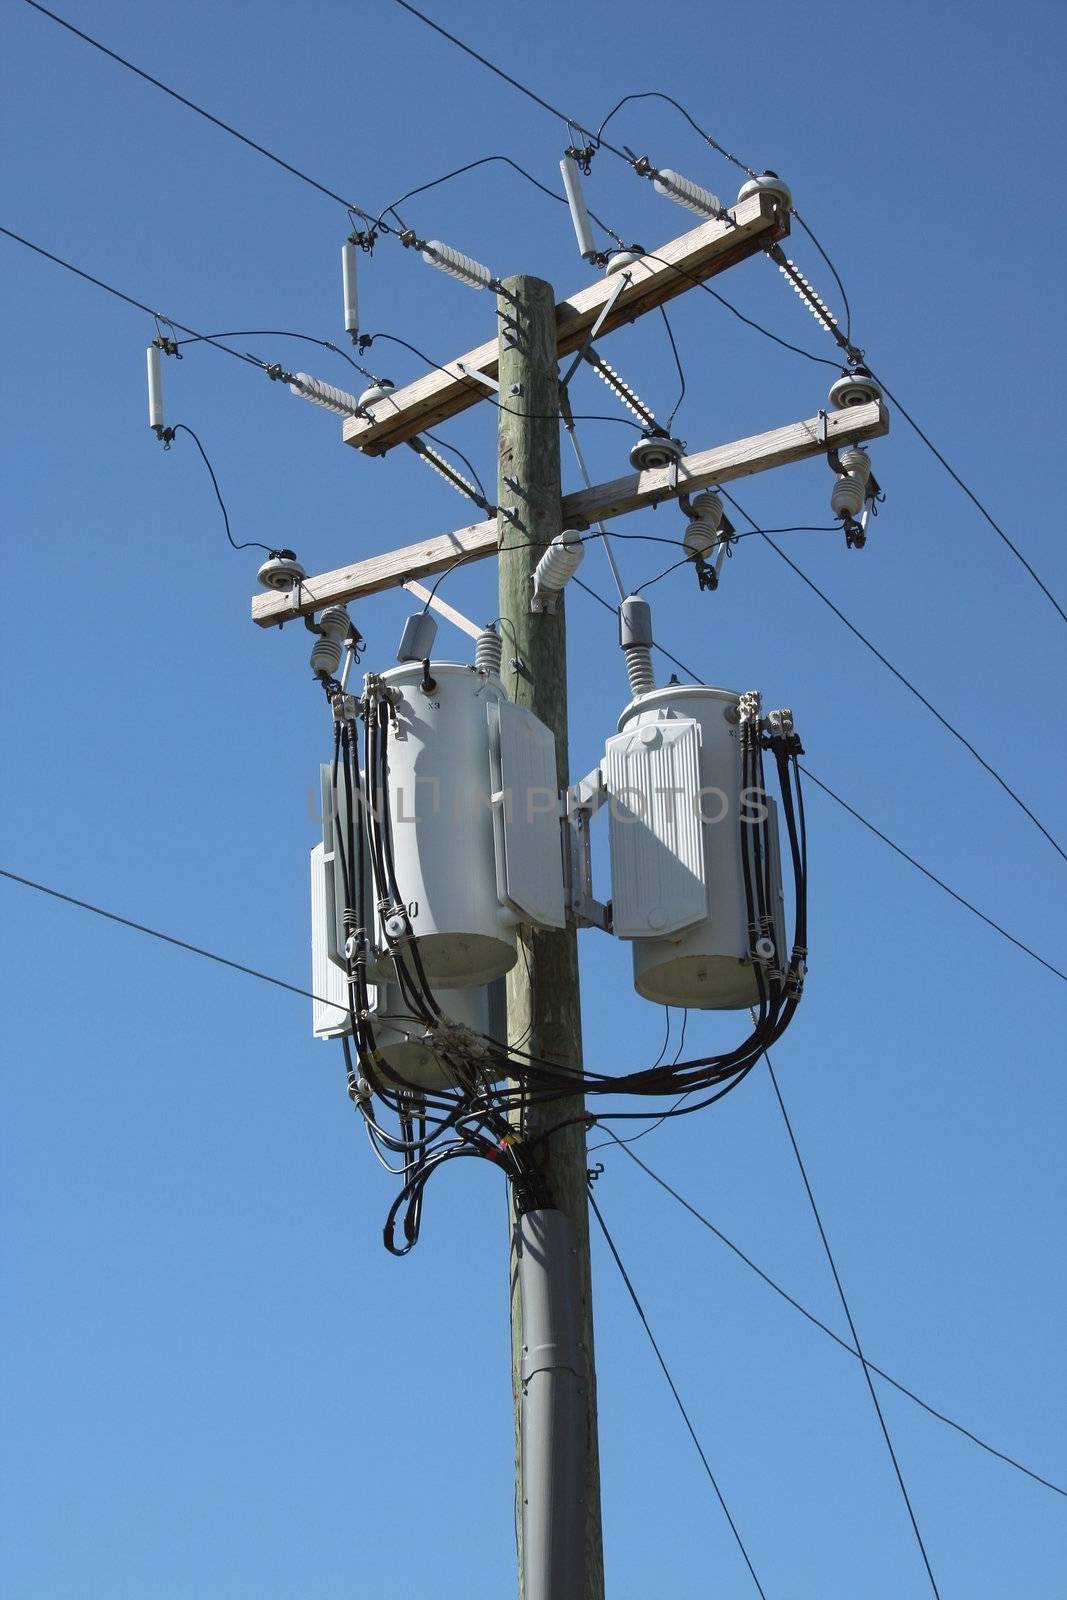 A Telephone pole with three transformers